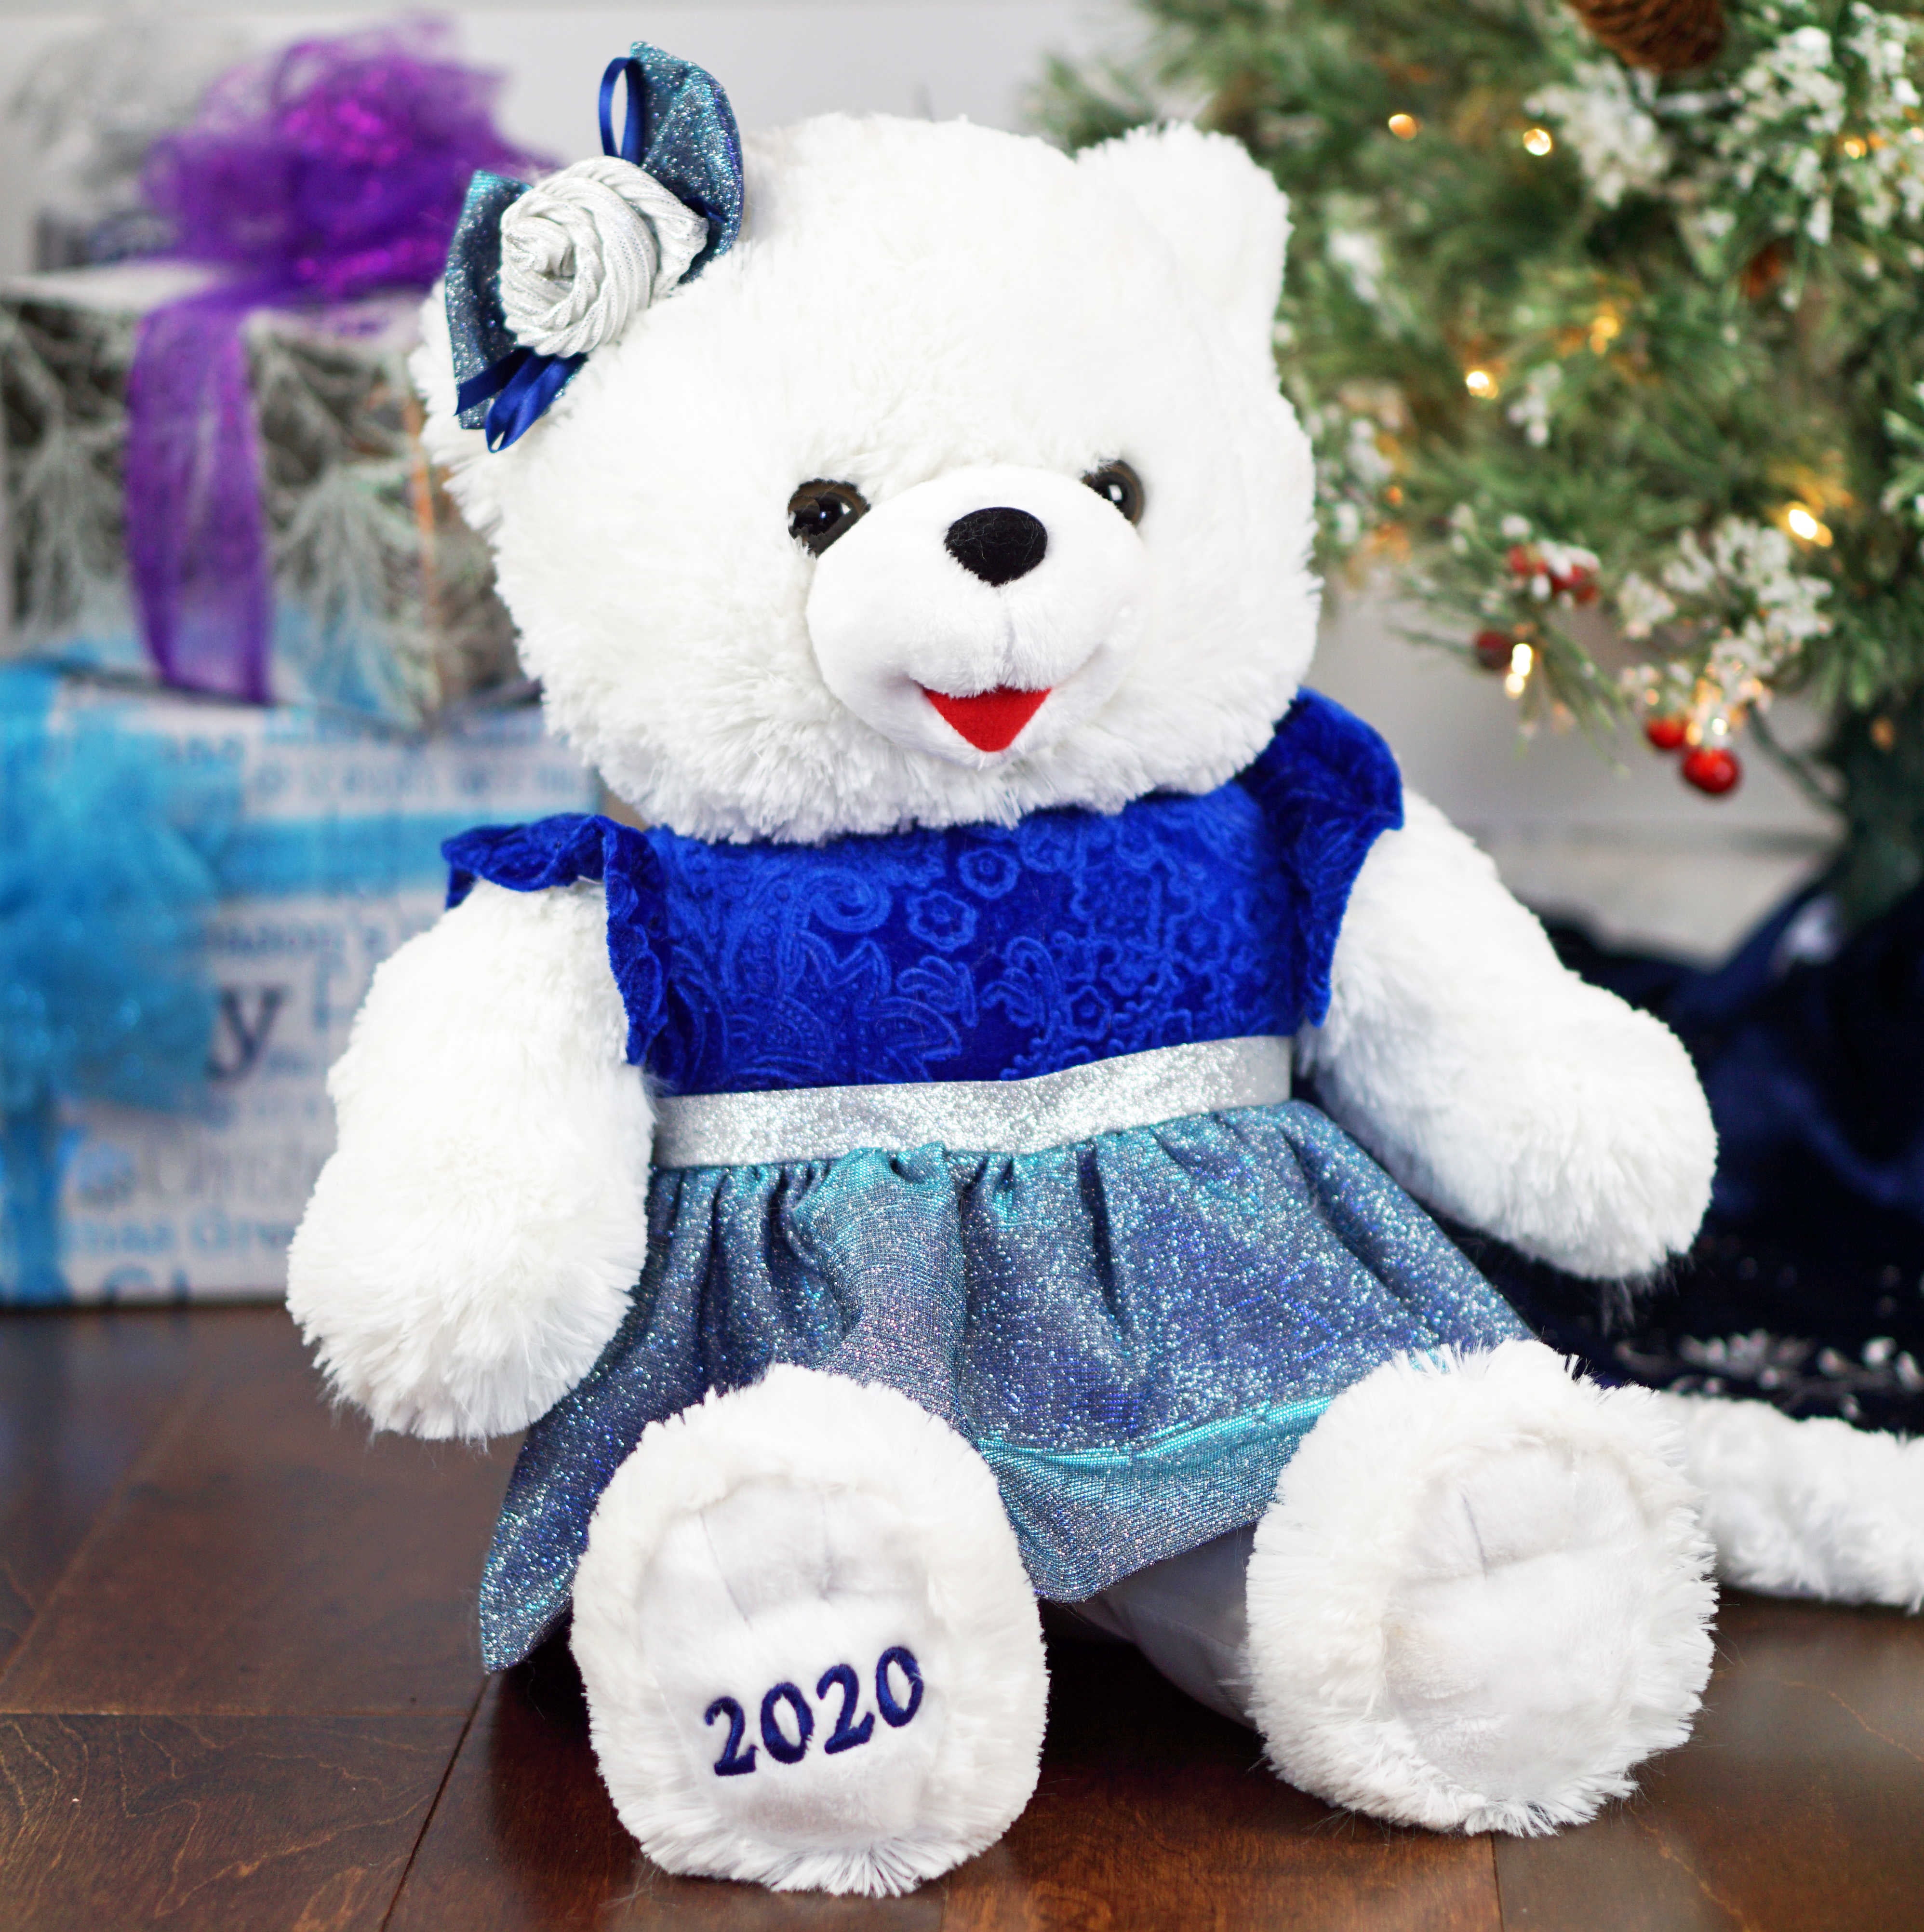 2020 Christmas White with Blue Girl Plush Stuffed Teddy Bear by Holiday Time 10" 